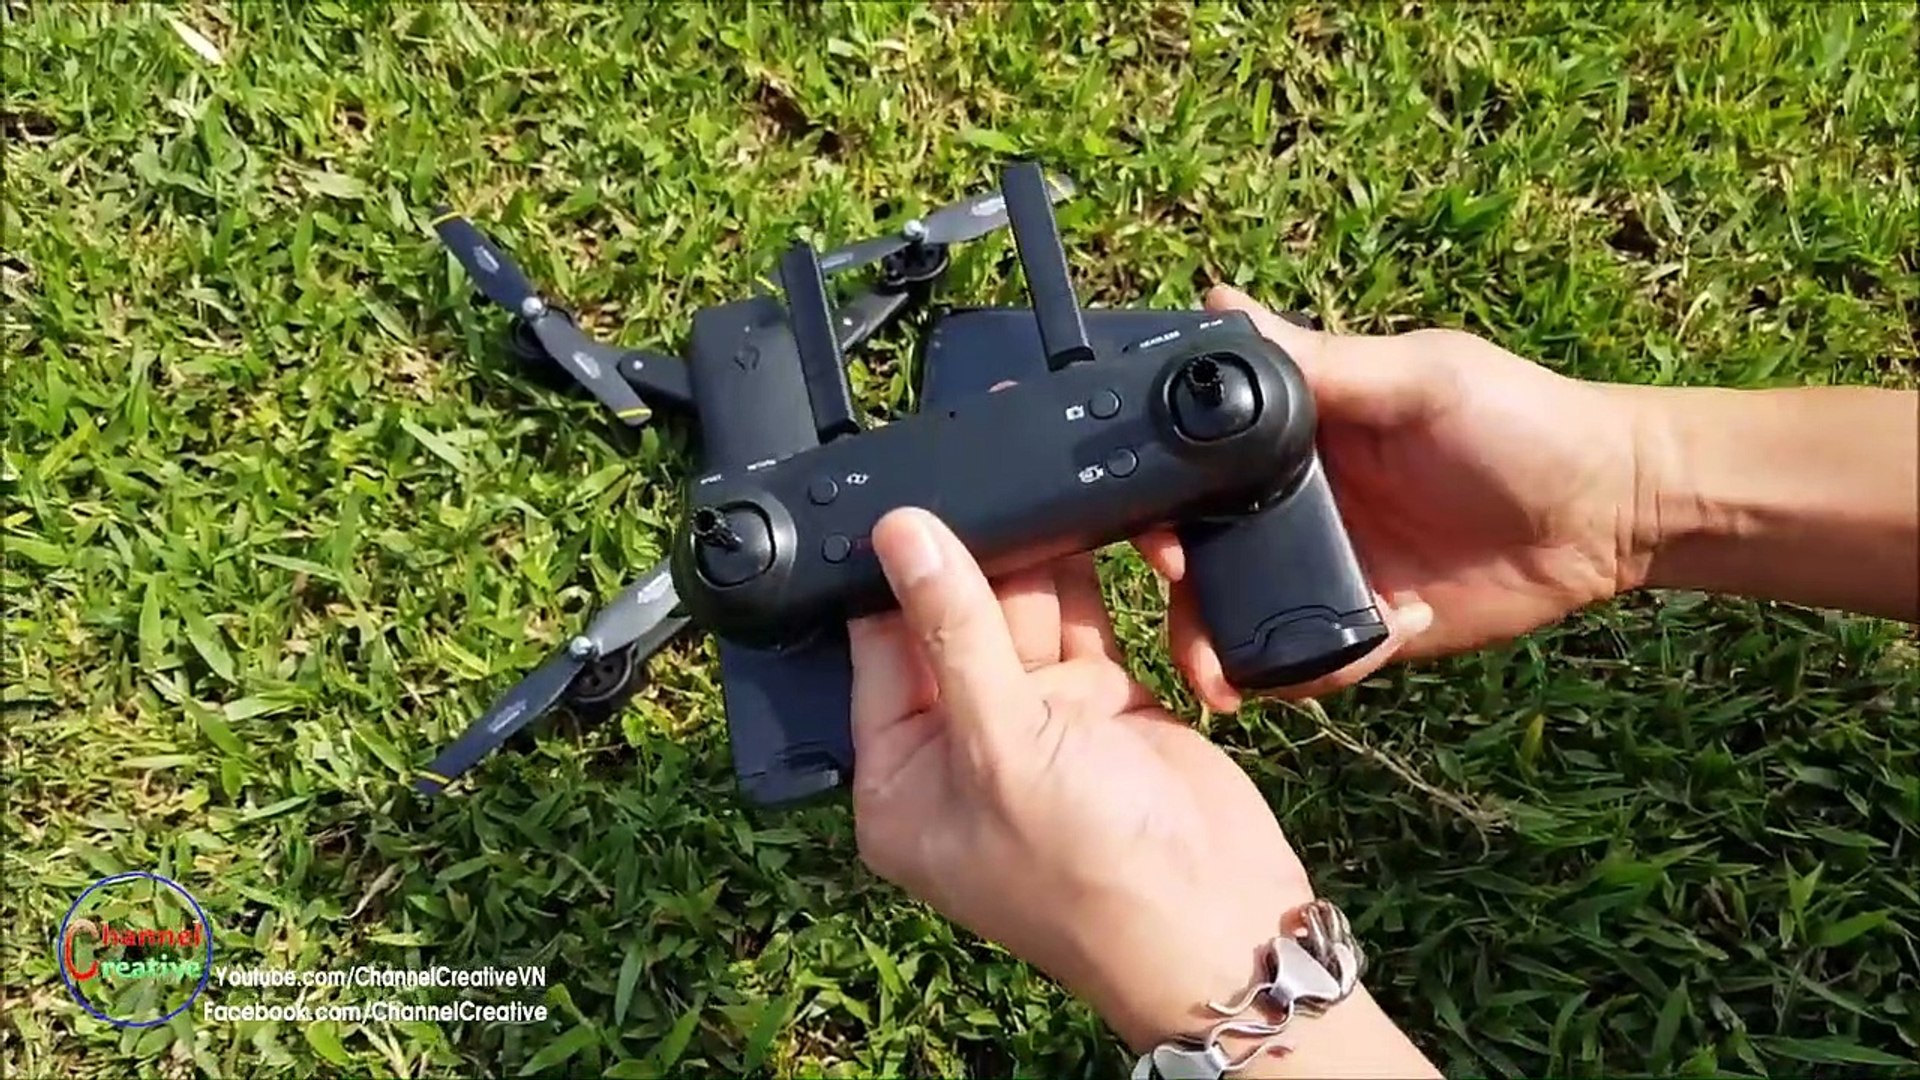 Test and Review SG700 Wifi FPV Drone - Dual Camera - video Dailymotion